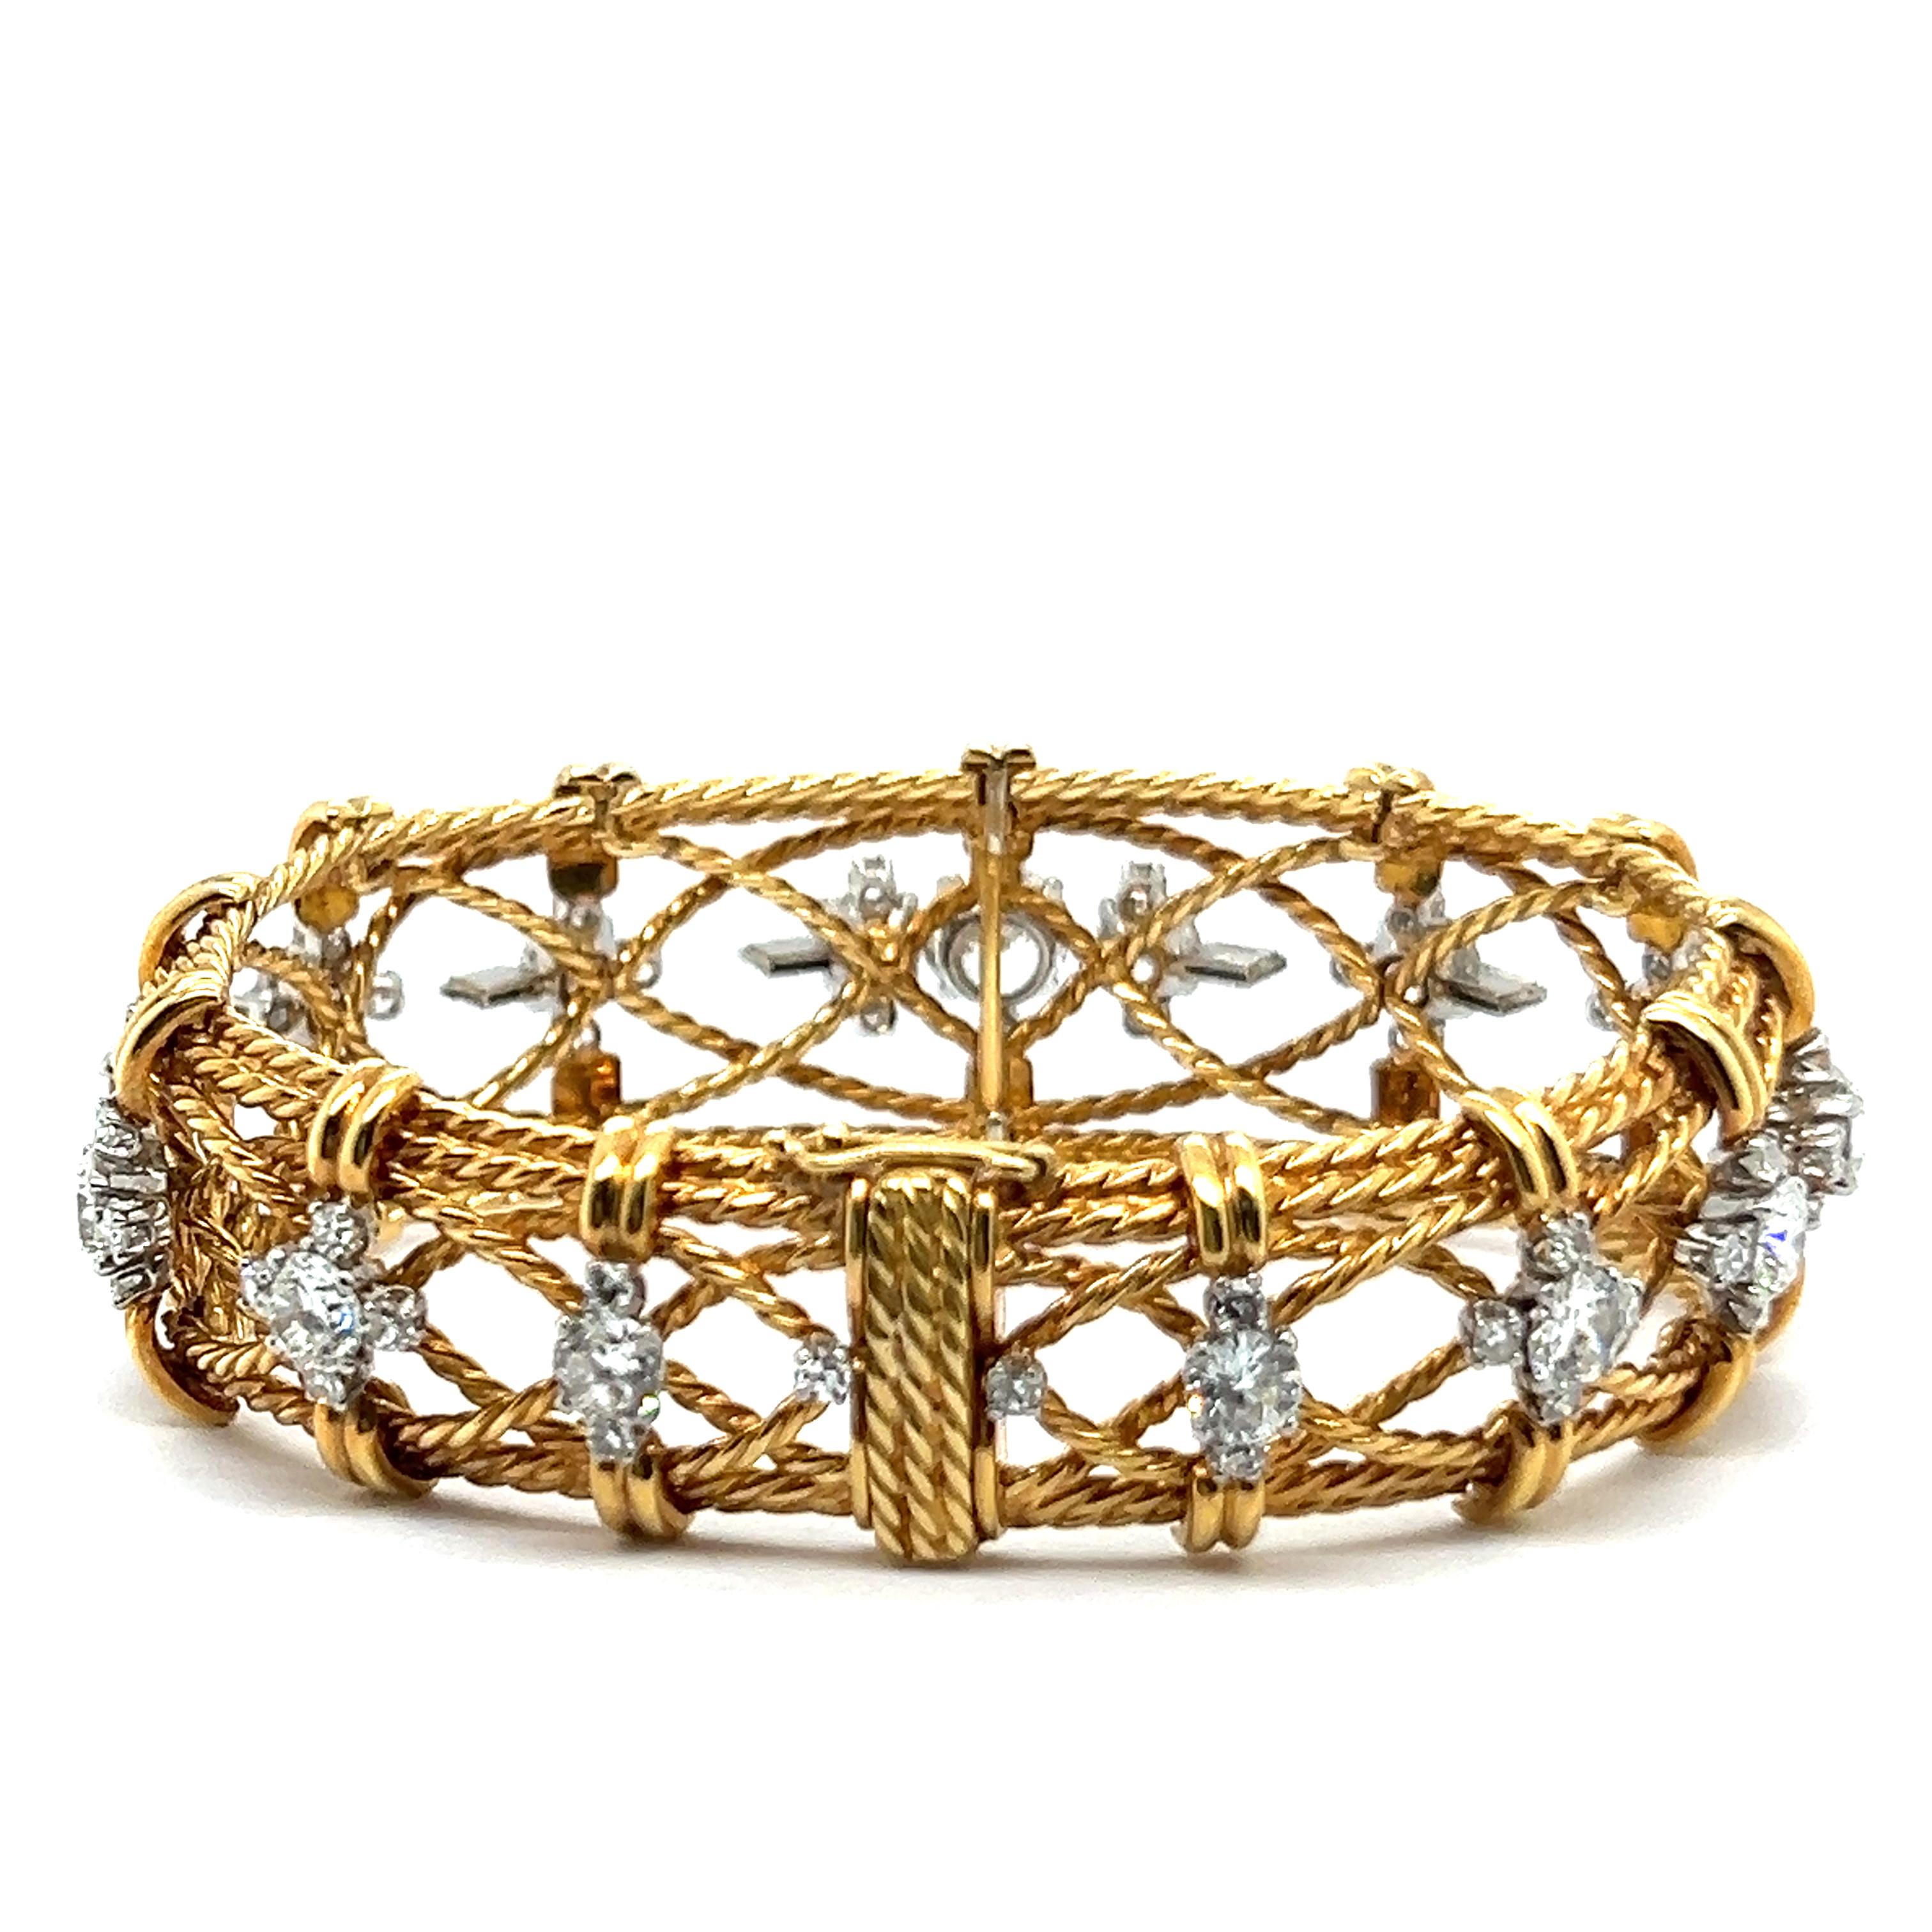 Vintage Bracelet with Diamonds in 18 Karat Gold by Gübelin In Good Condition For Sale In Lucerne, CH